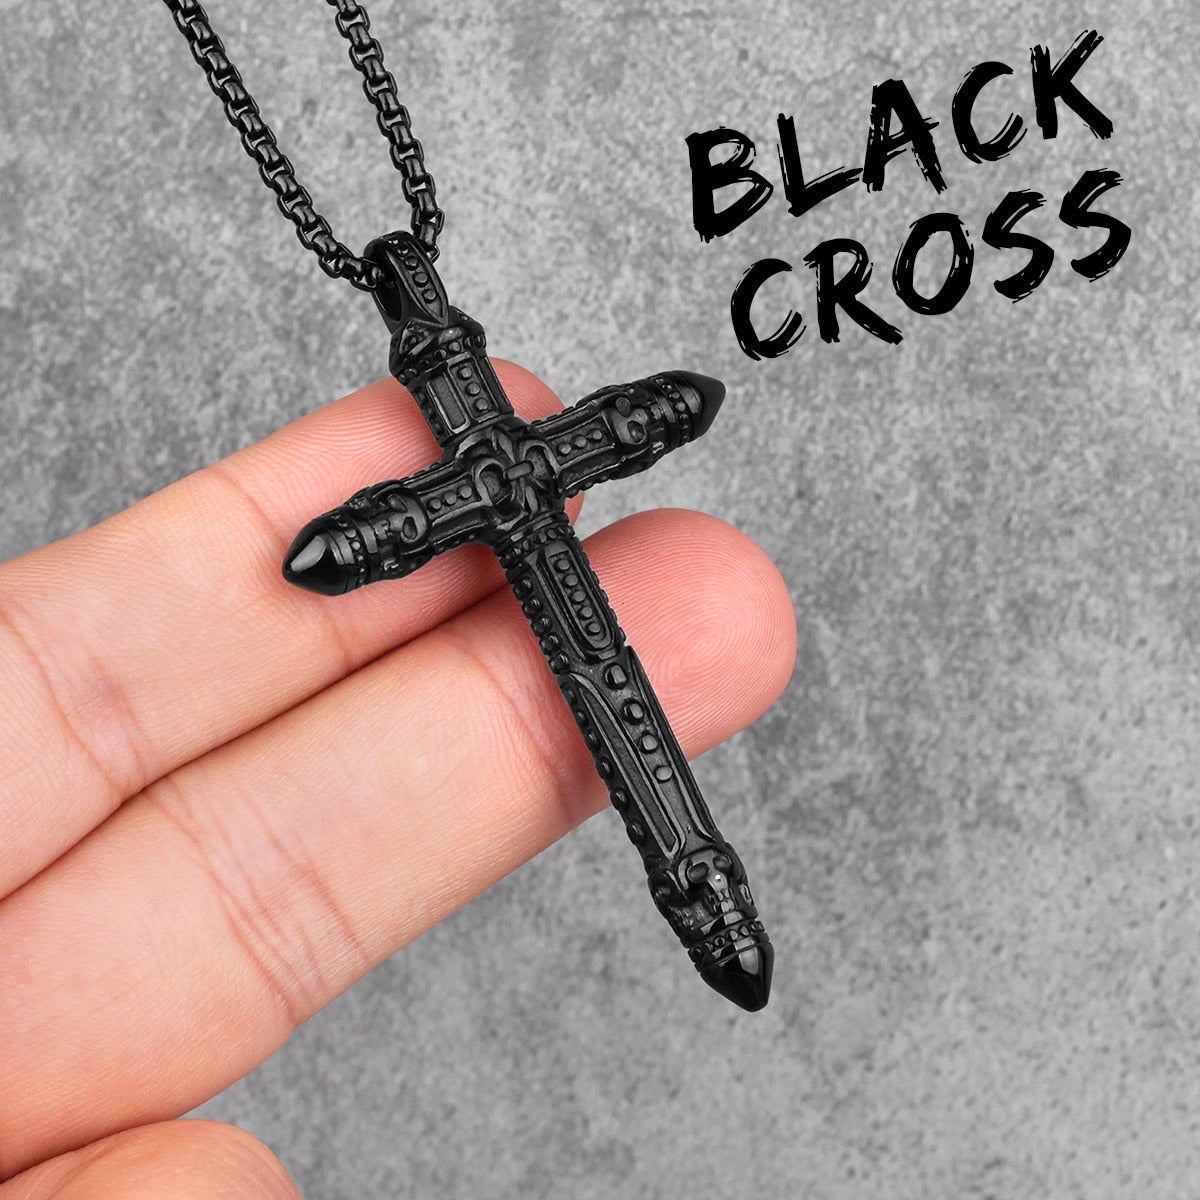 Black Stainless Steel Cross Pendant Necklace Jewelry